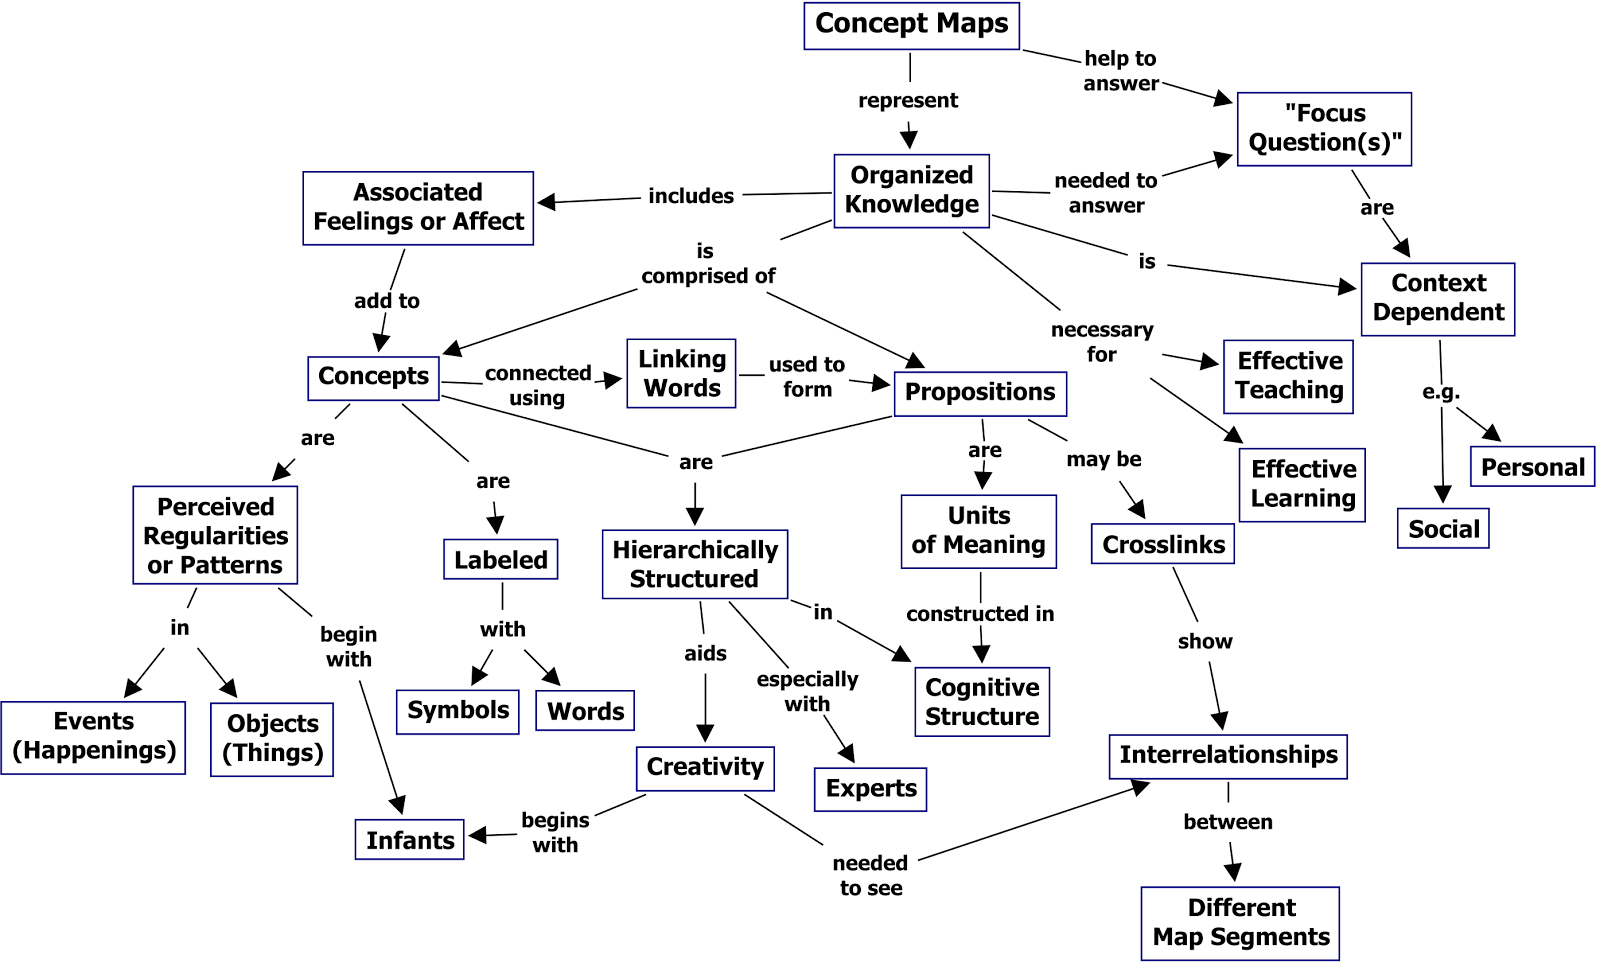 tech-landscape-life-is-full-of-tough-choices-mindmap-or-concept-map